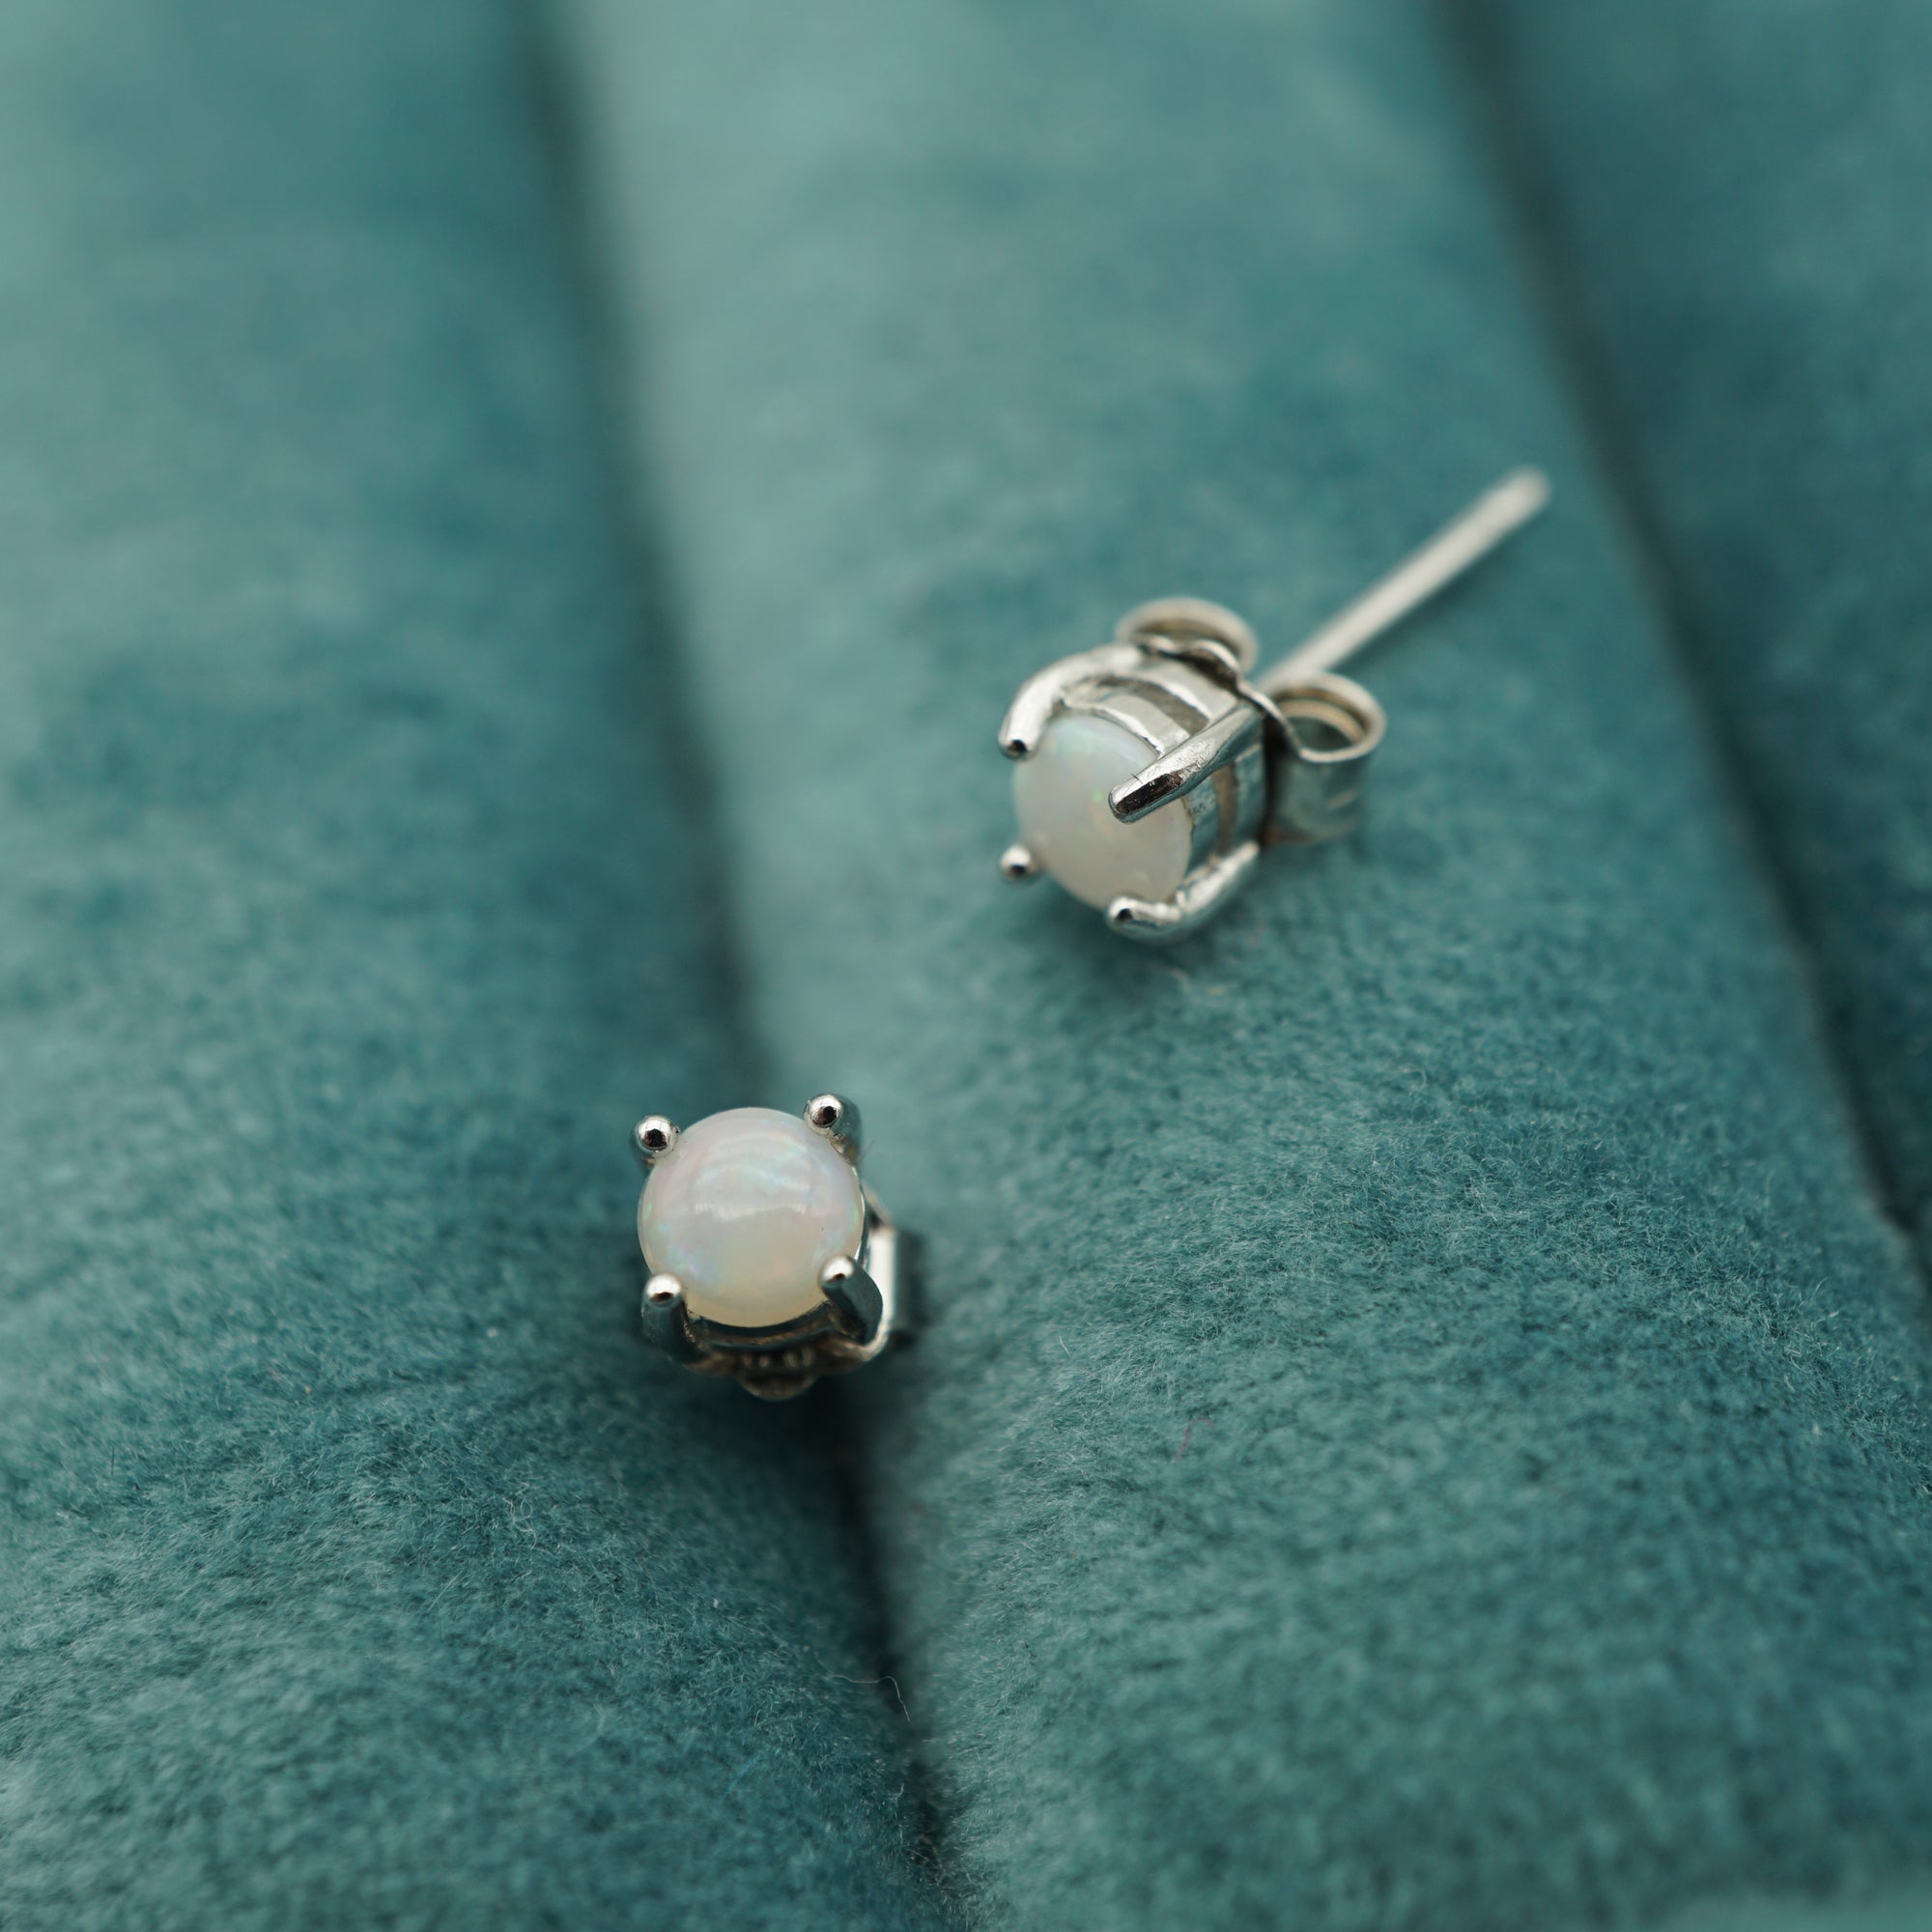 Tiny Silver Solid Round Oval Earrings, Opal minimalist studs, Silver earrings, Dainty Earrings, Small Stud Earrings, Stud Earrings-Vsabel Jewellery